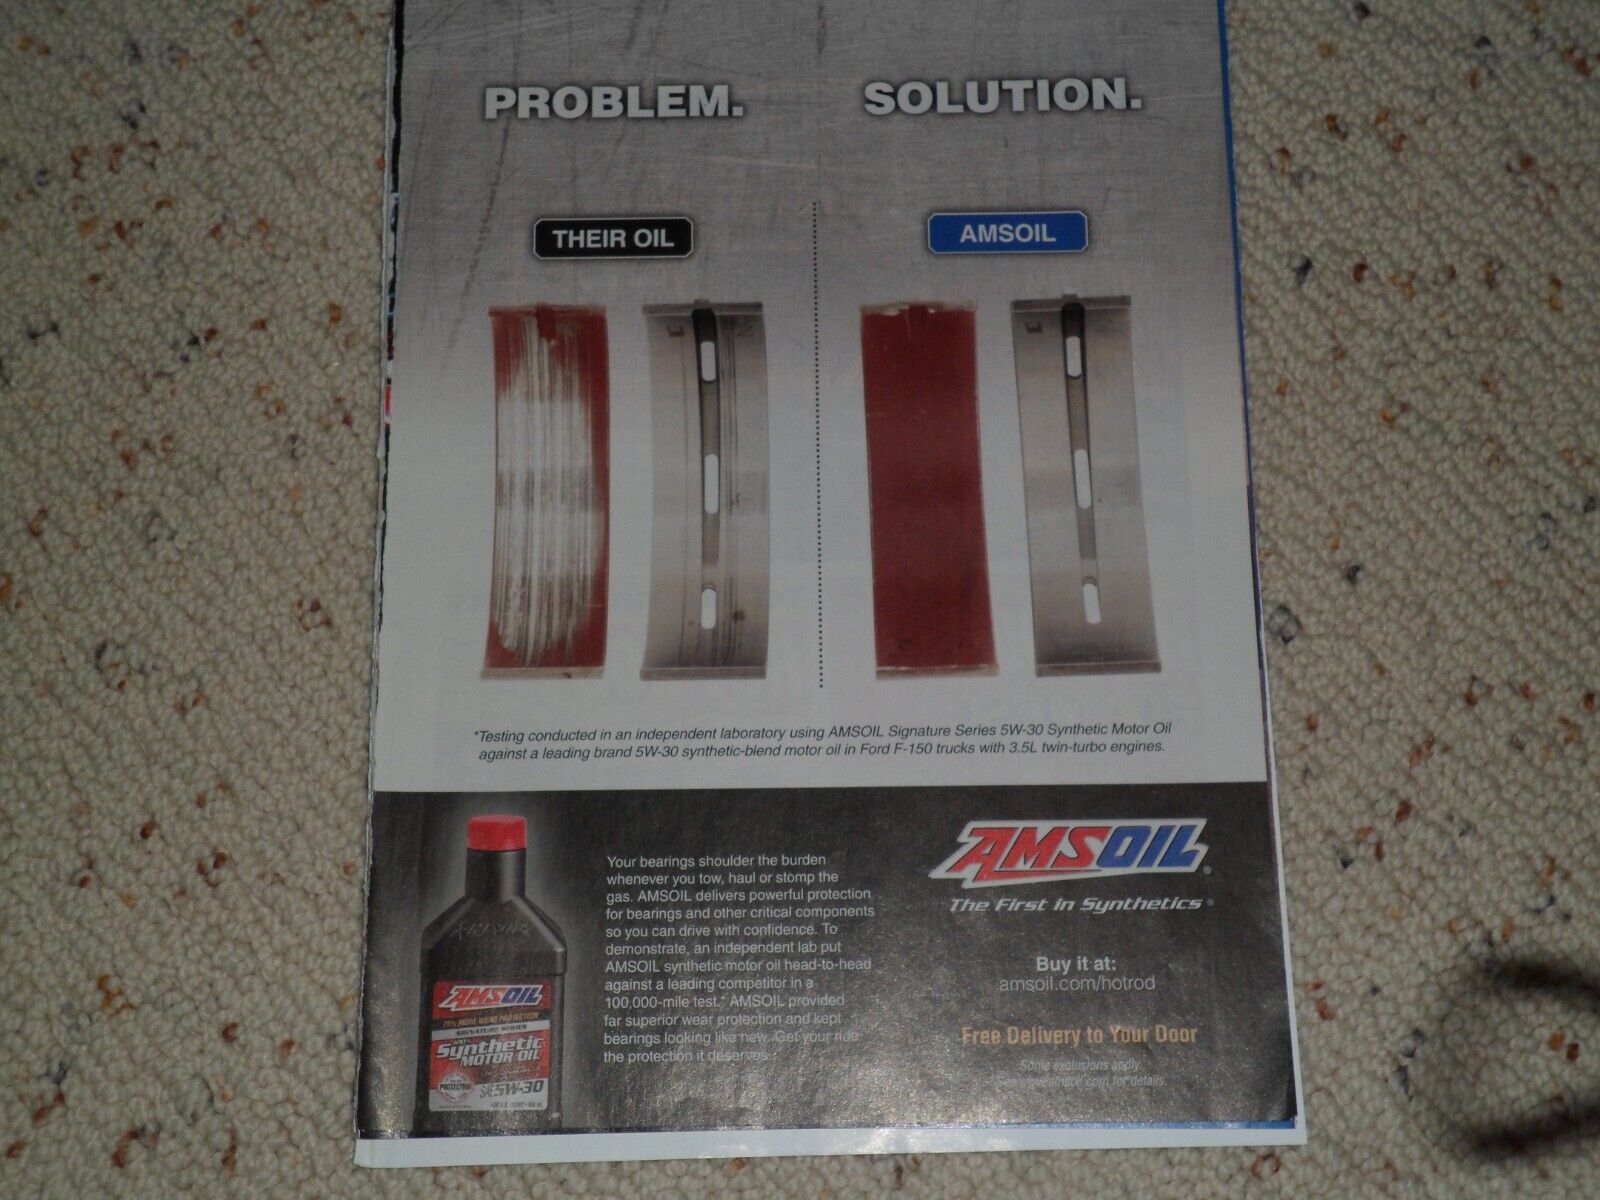 2019 AMSOIL AD / ARTICLE